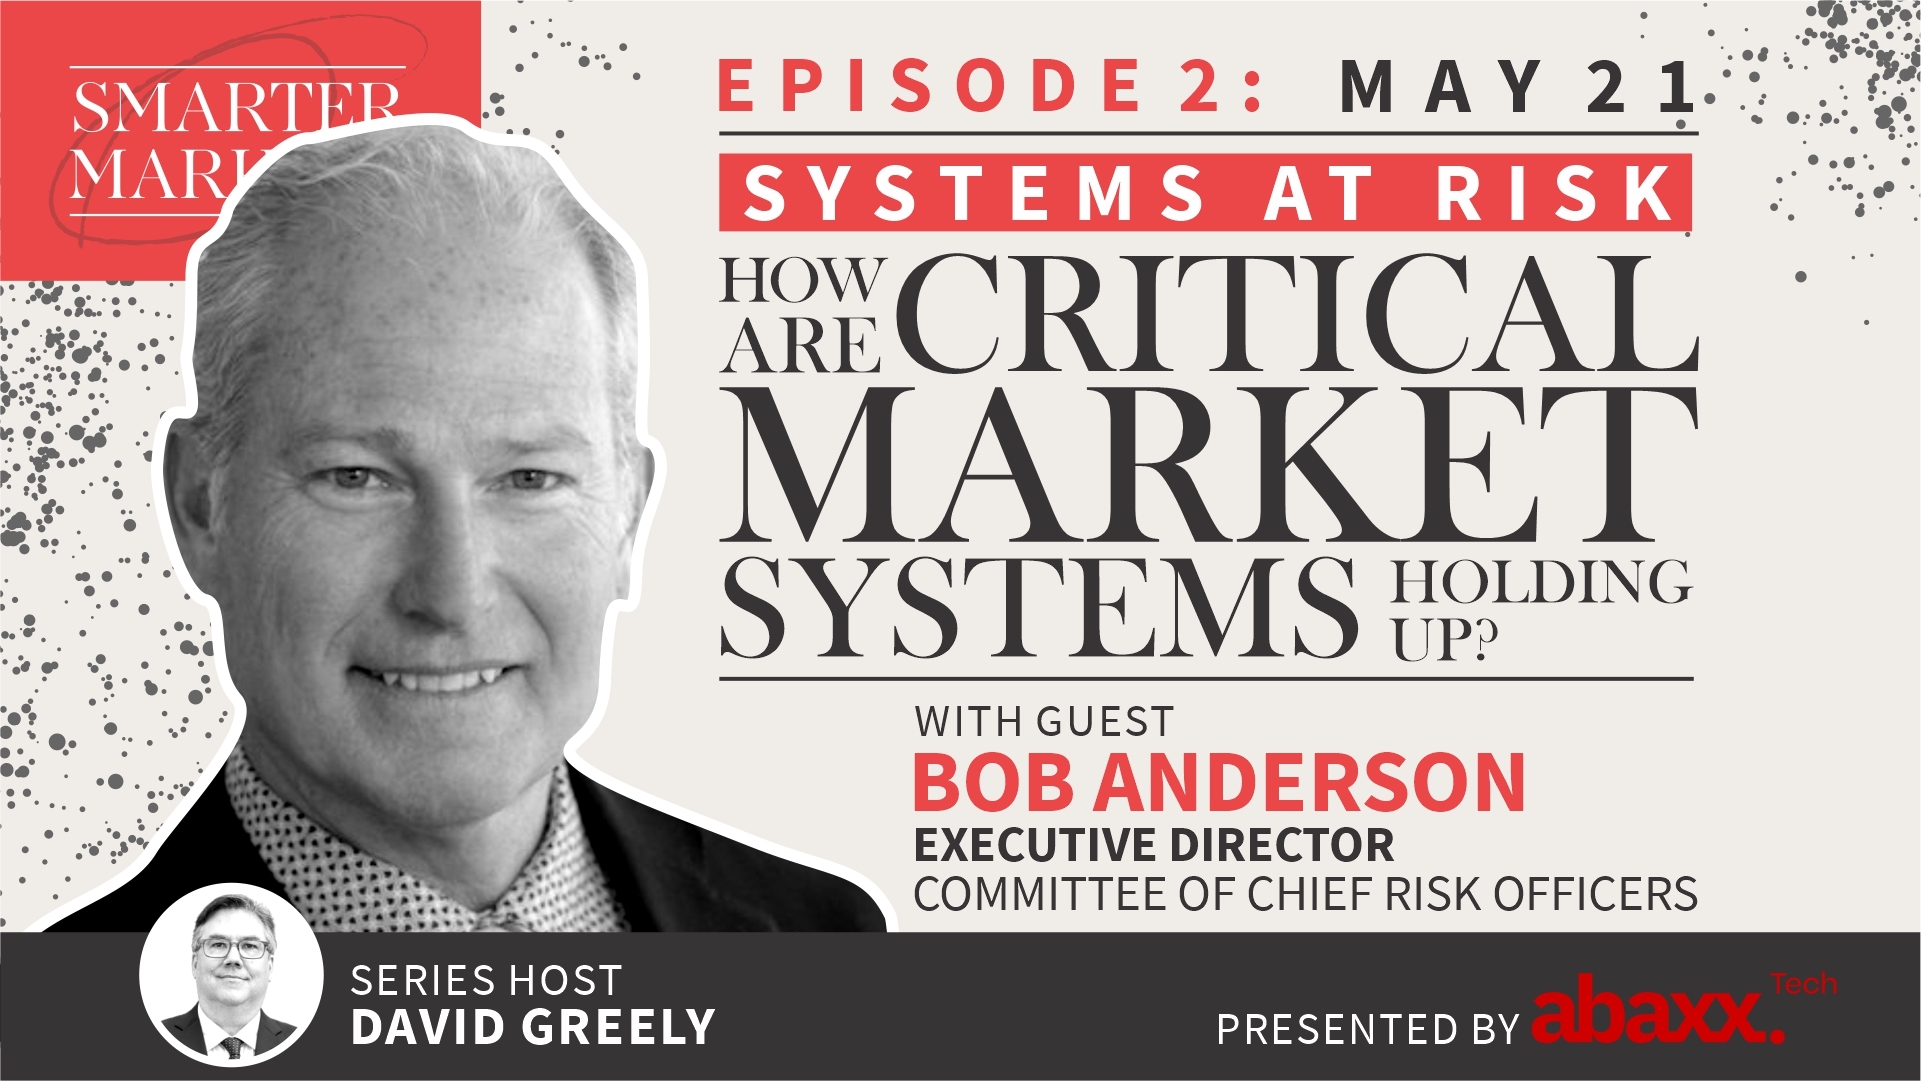 Systems at Risk Episode 2 | Bob Anderson, Executive Director, Committee of Chief Risk Officers